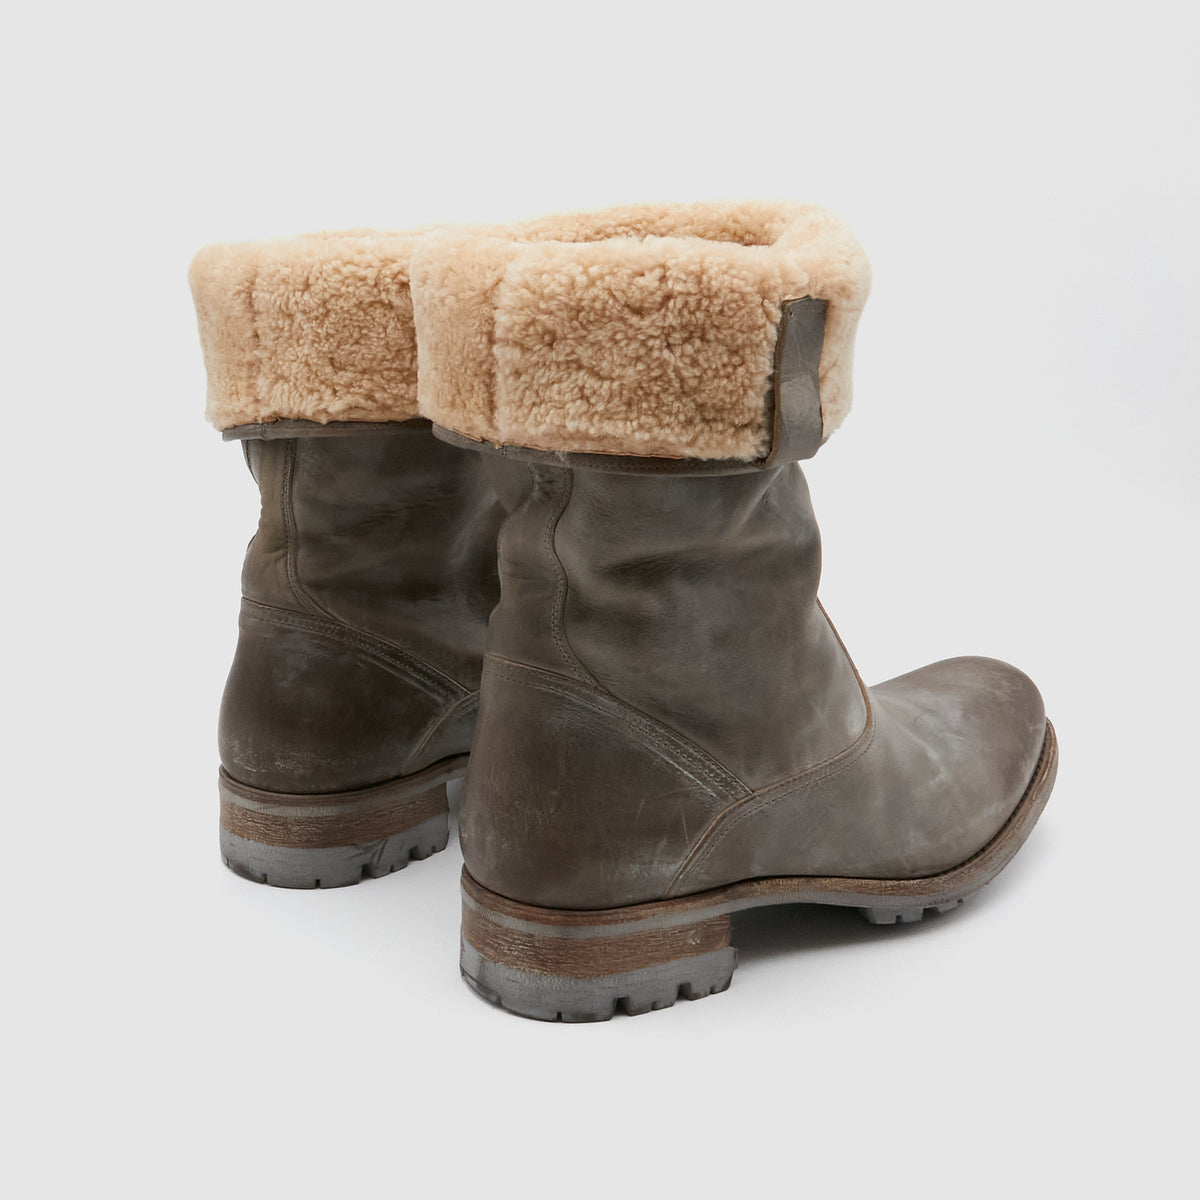 n.d.c. made by hand Vallee Blanche Barrage Sheep Boots